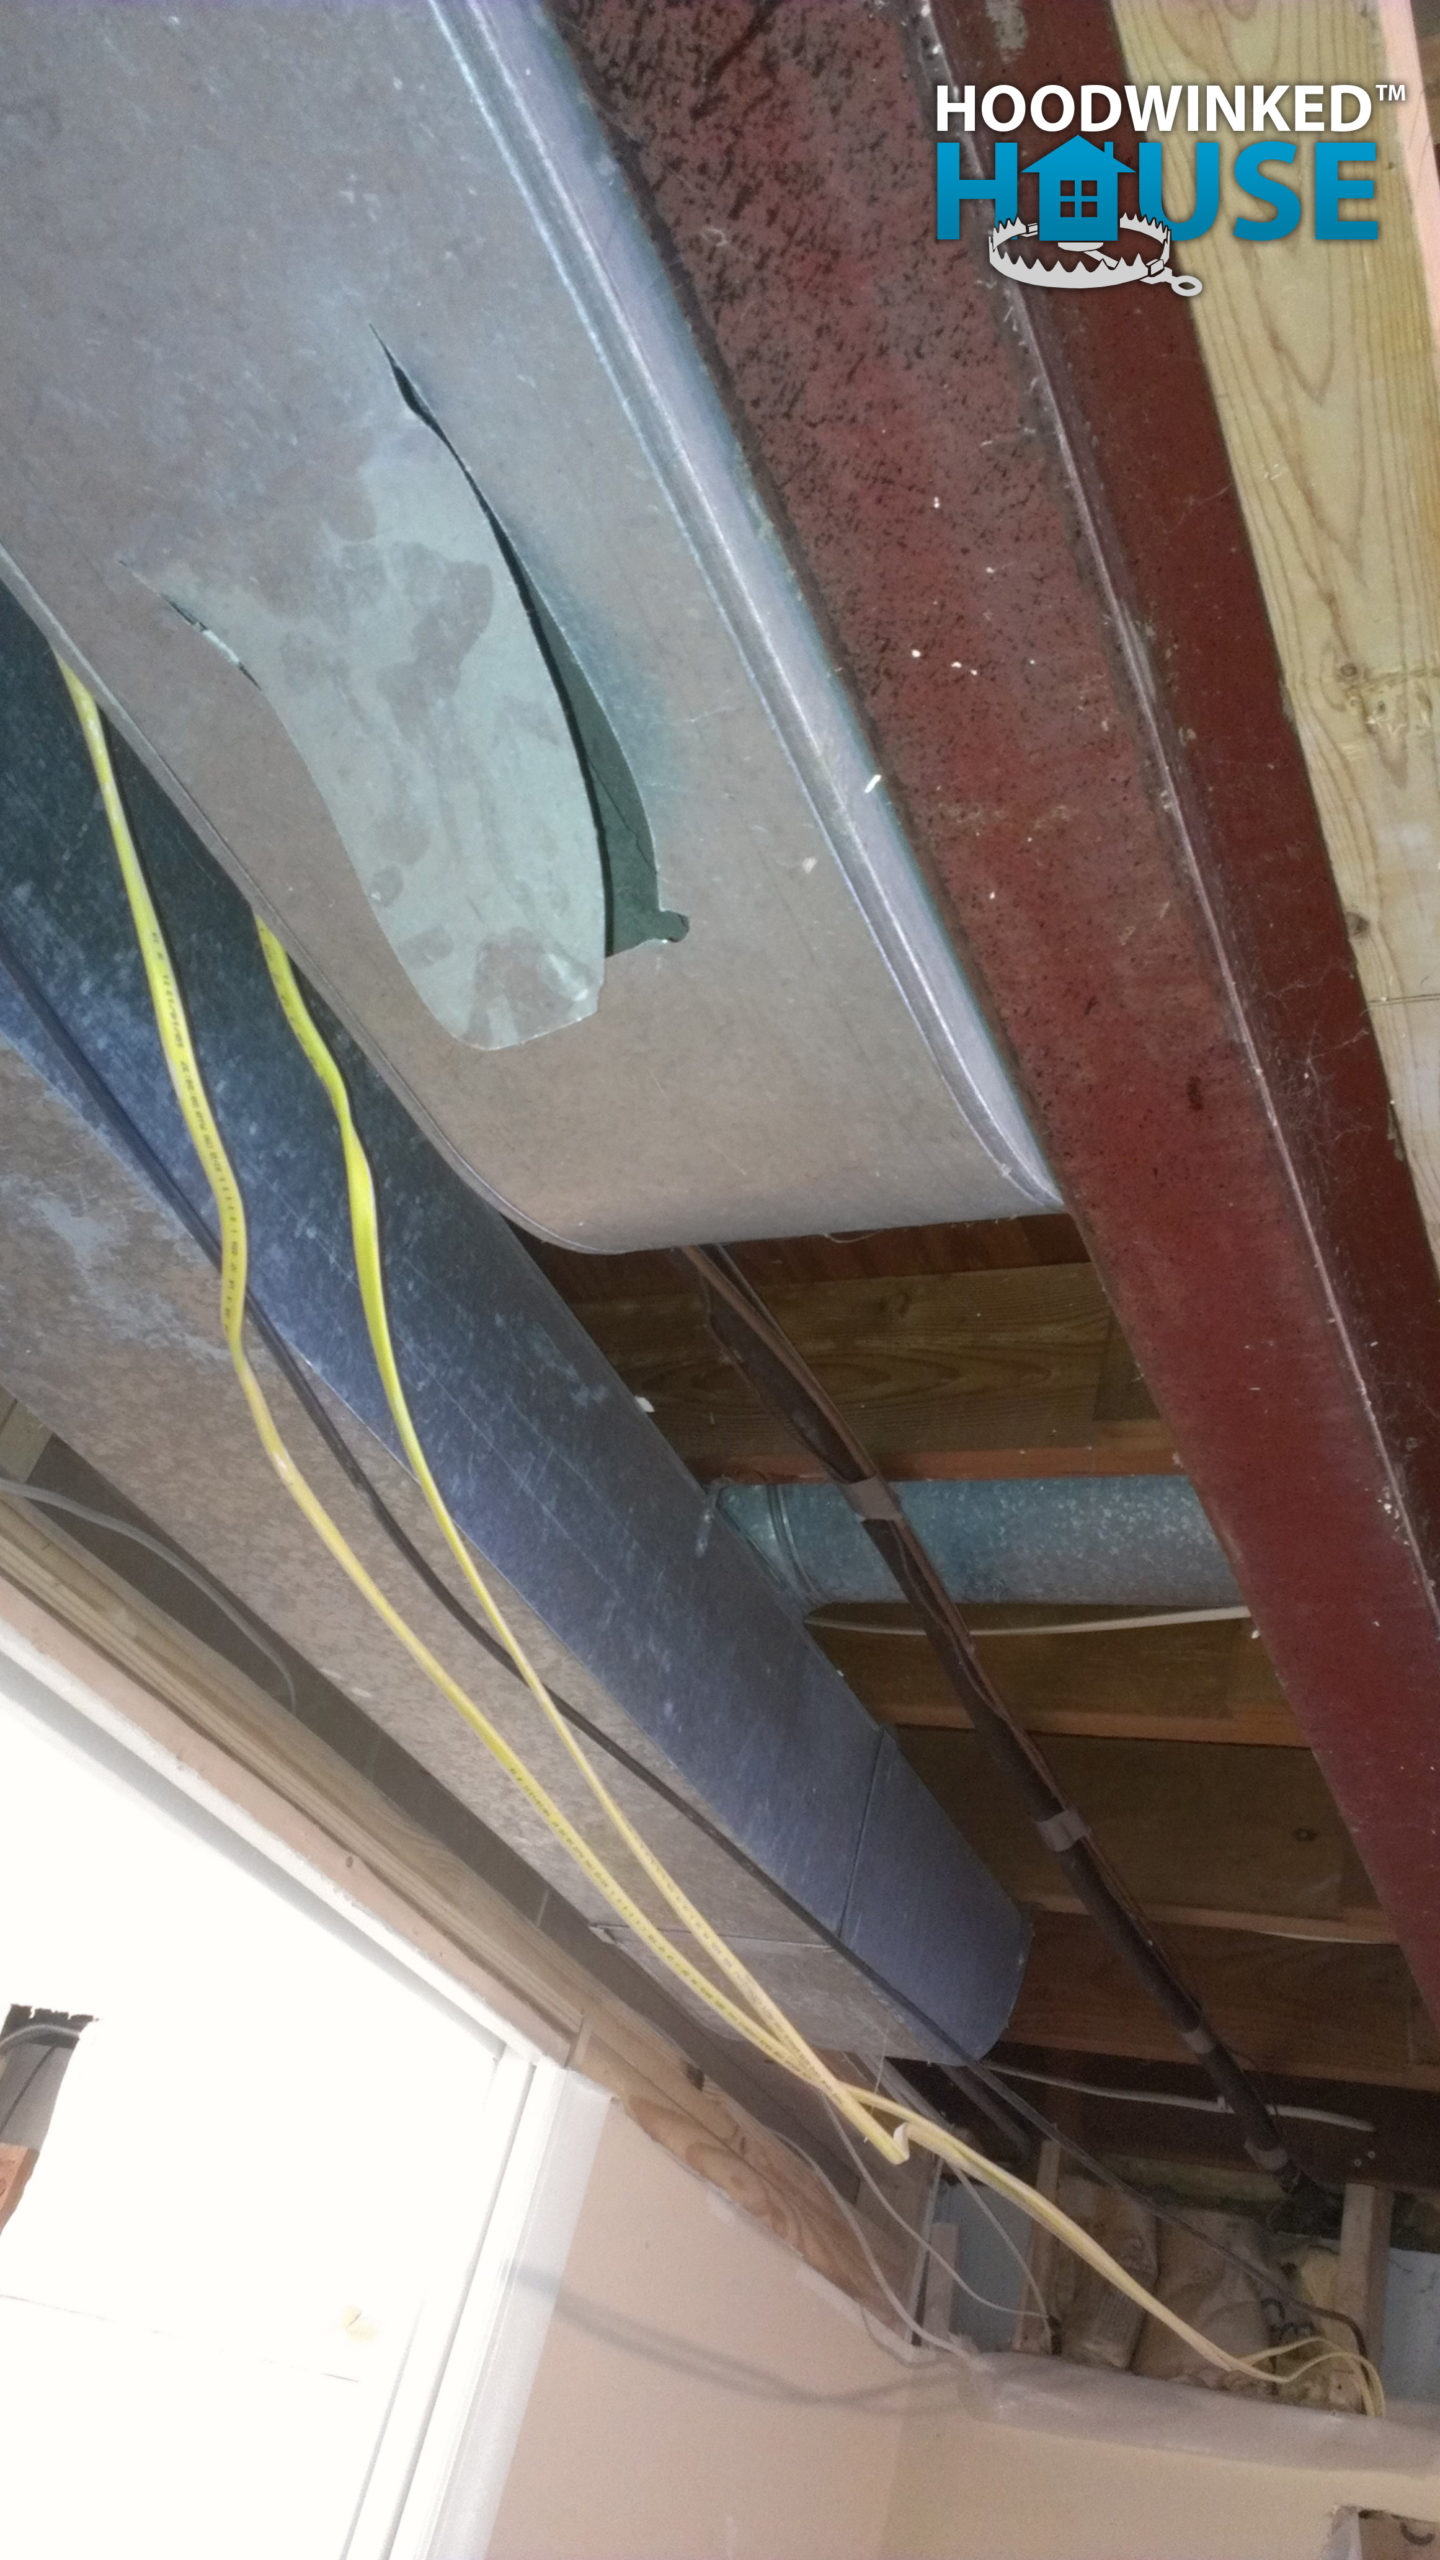 The main duct in a house with a large flap hole cut in it.